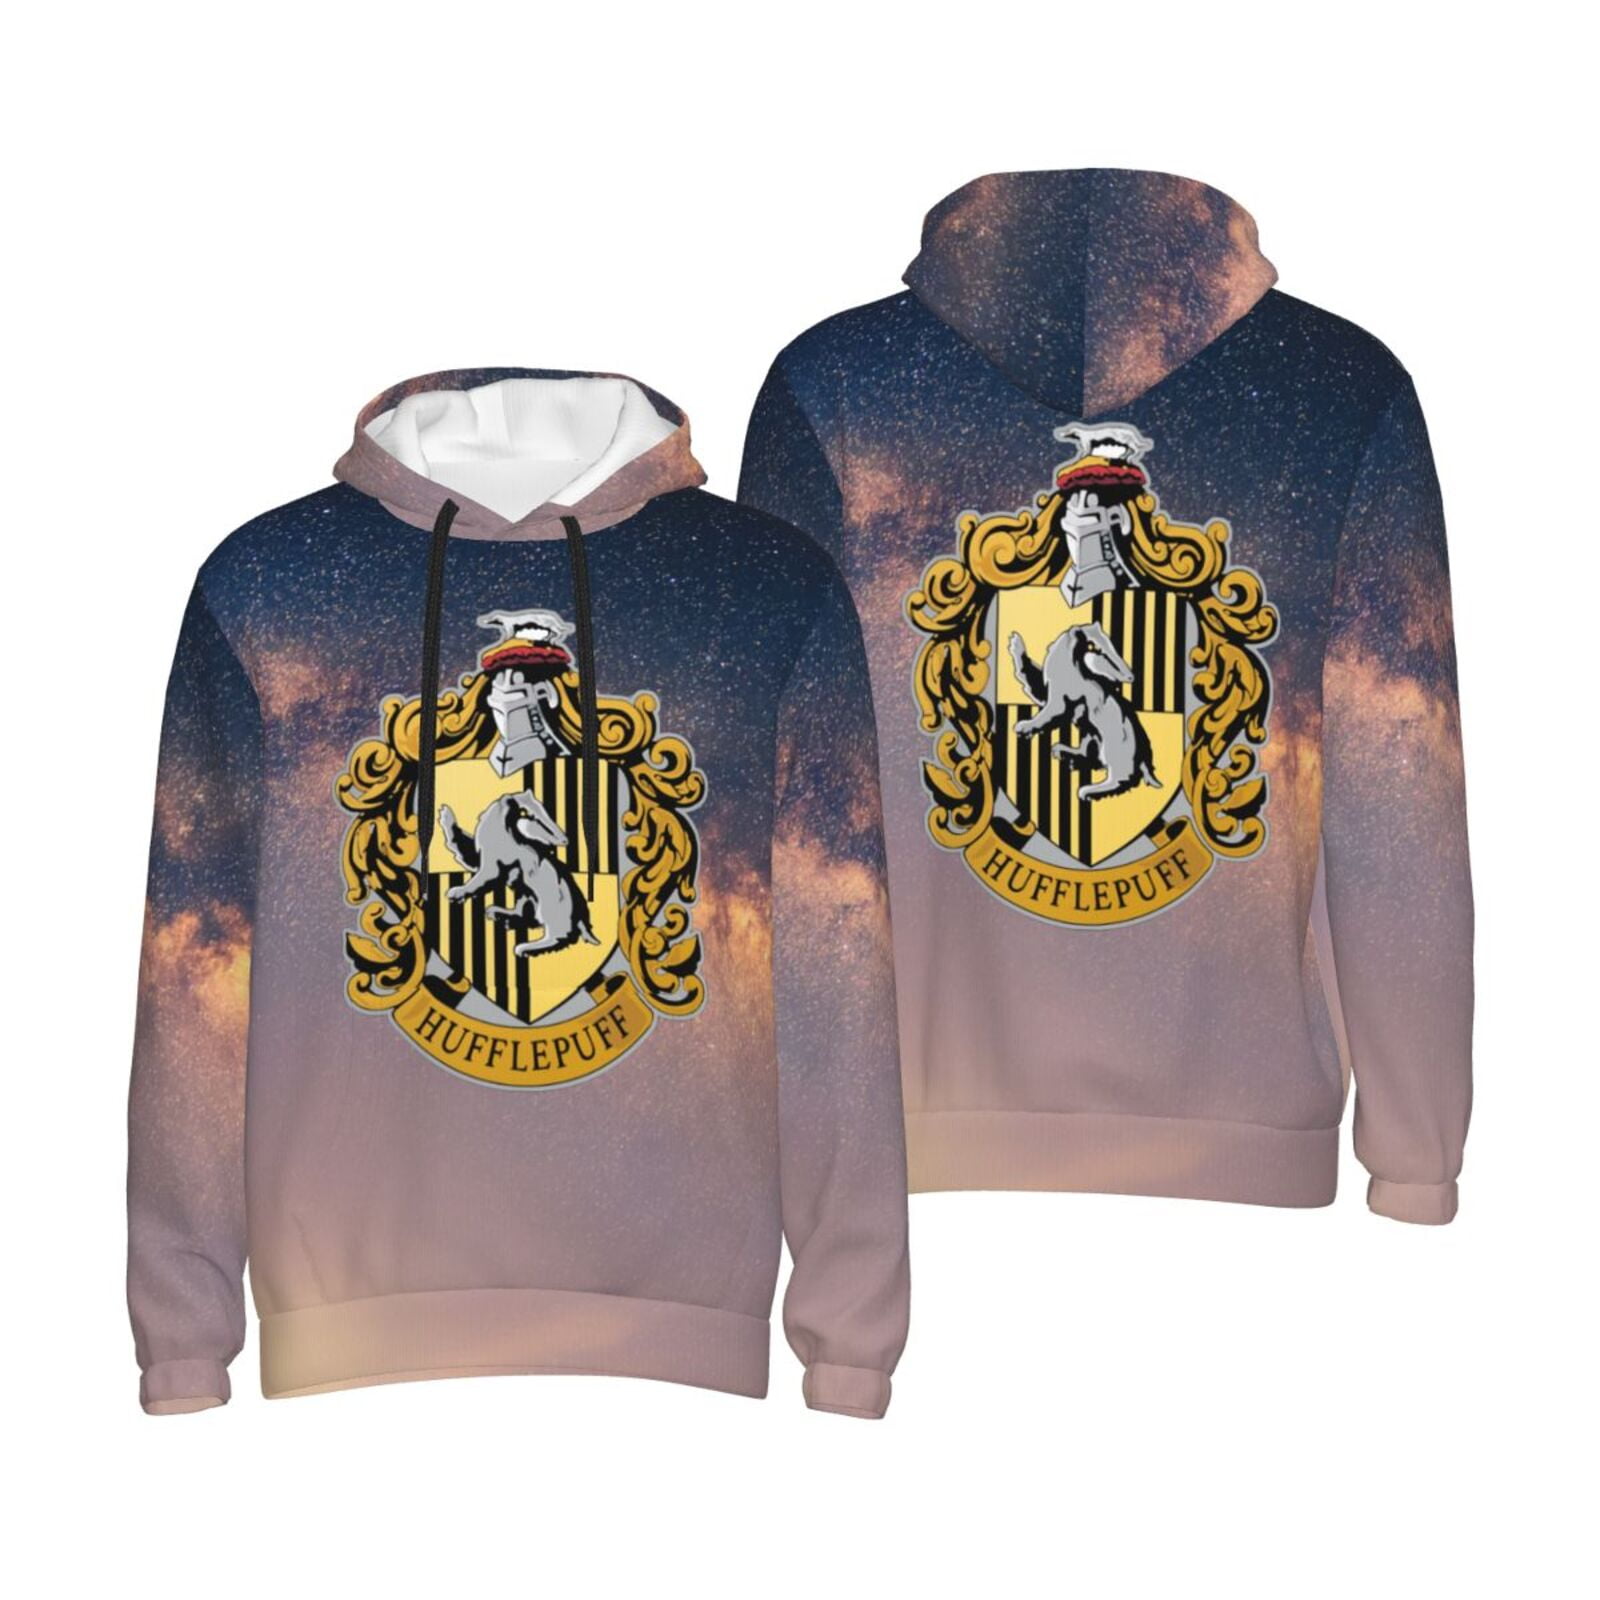 Hufflepuff Harry Potter Sweatshirt For Mens Fashion Hoodies Pullover  Athletic Daily Hoody Hooded Gift